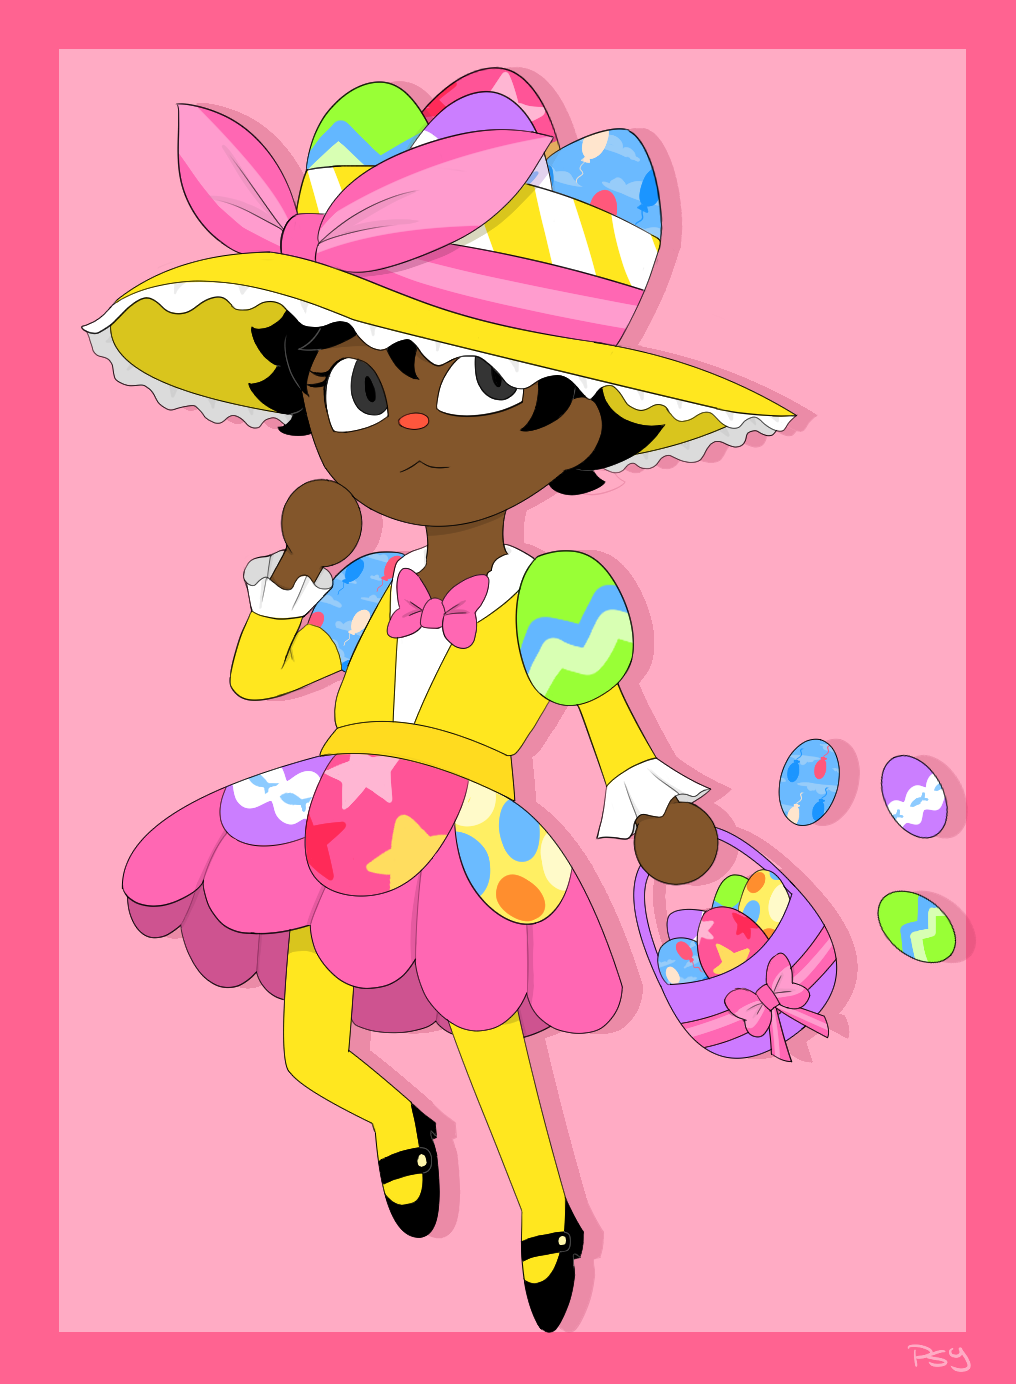 ACNH Bunny Day Outfit by MissPsyson on DeviantArt